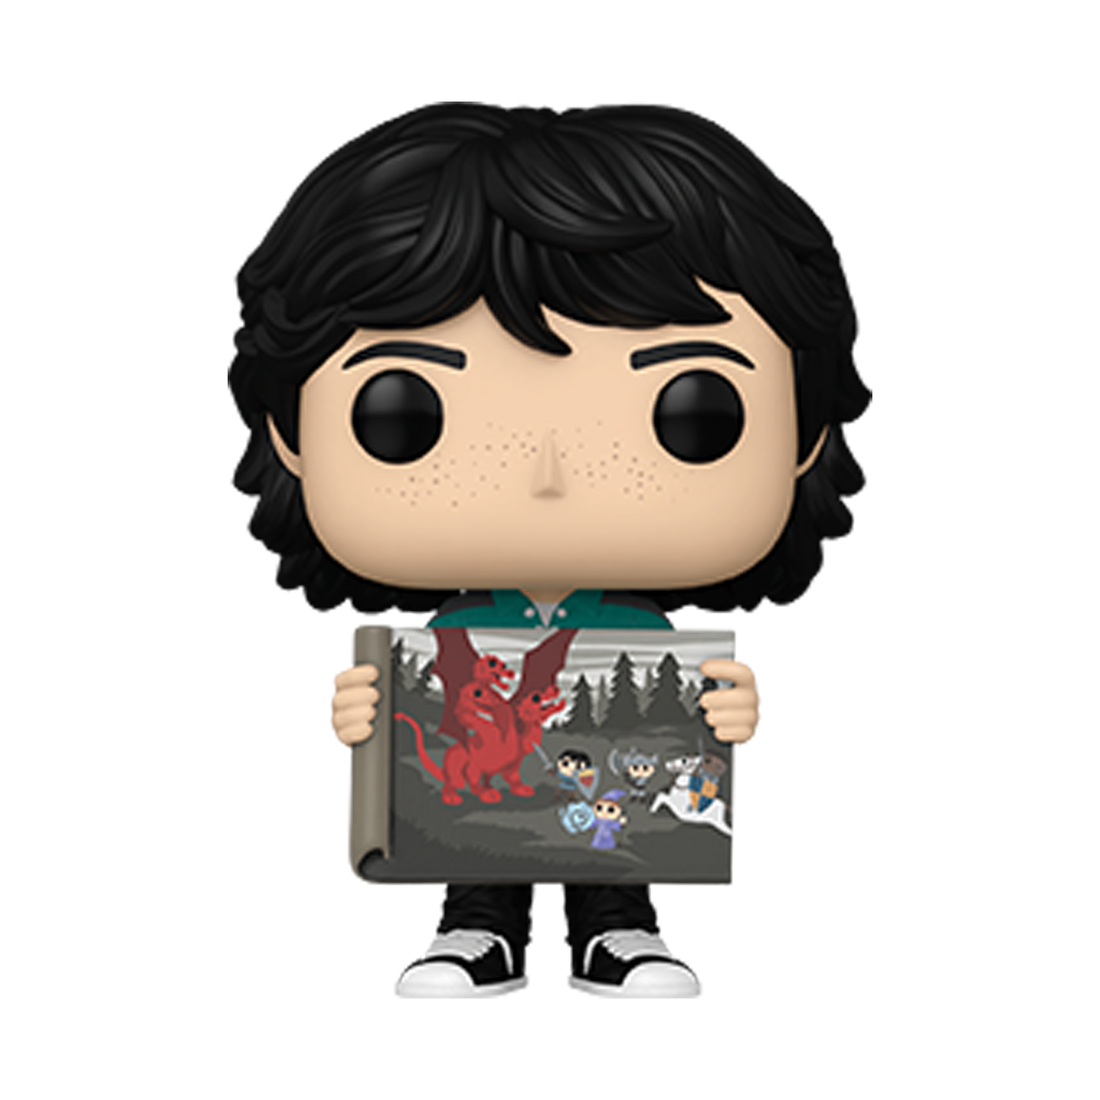 Funko Pop! Television Stranger Things 1539 Mike with Painting Funko